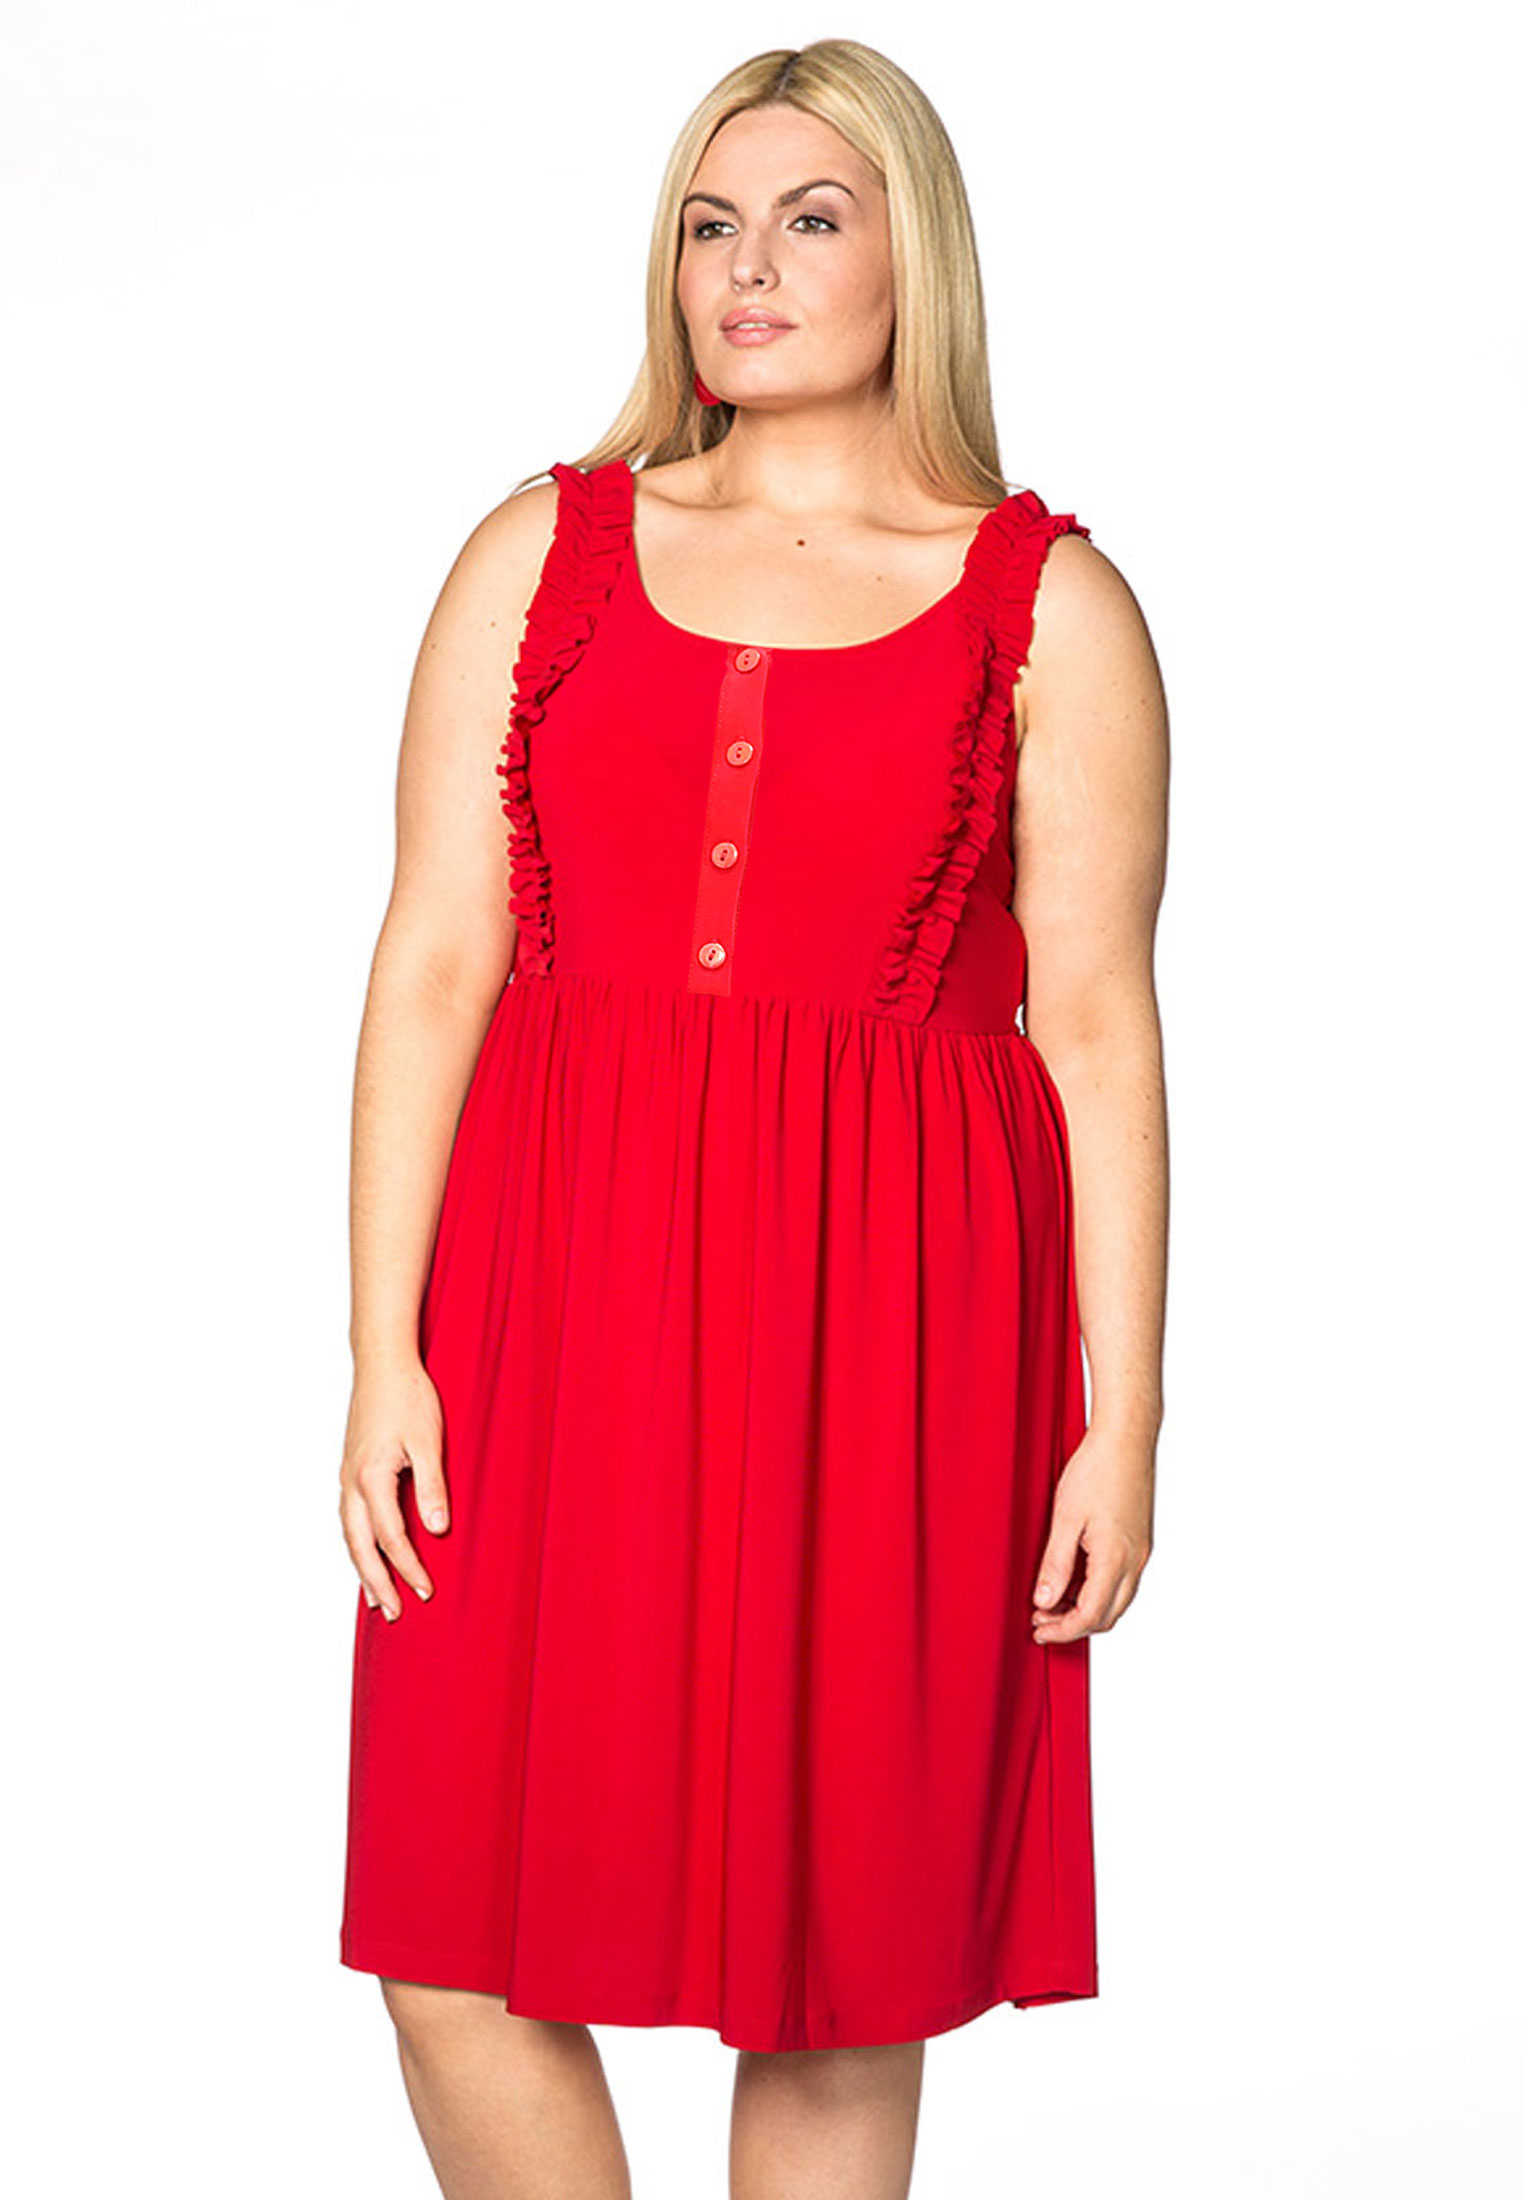 Dress ruffled strap DOLCE M red